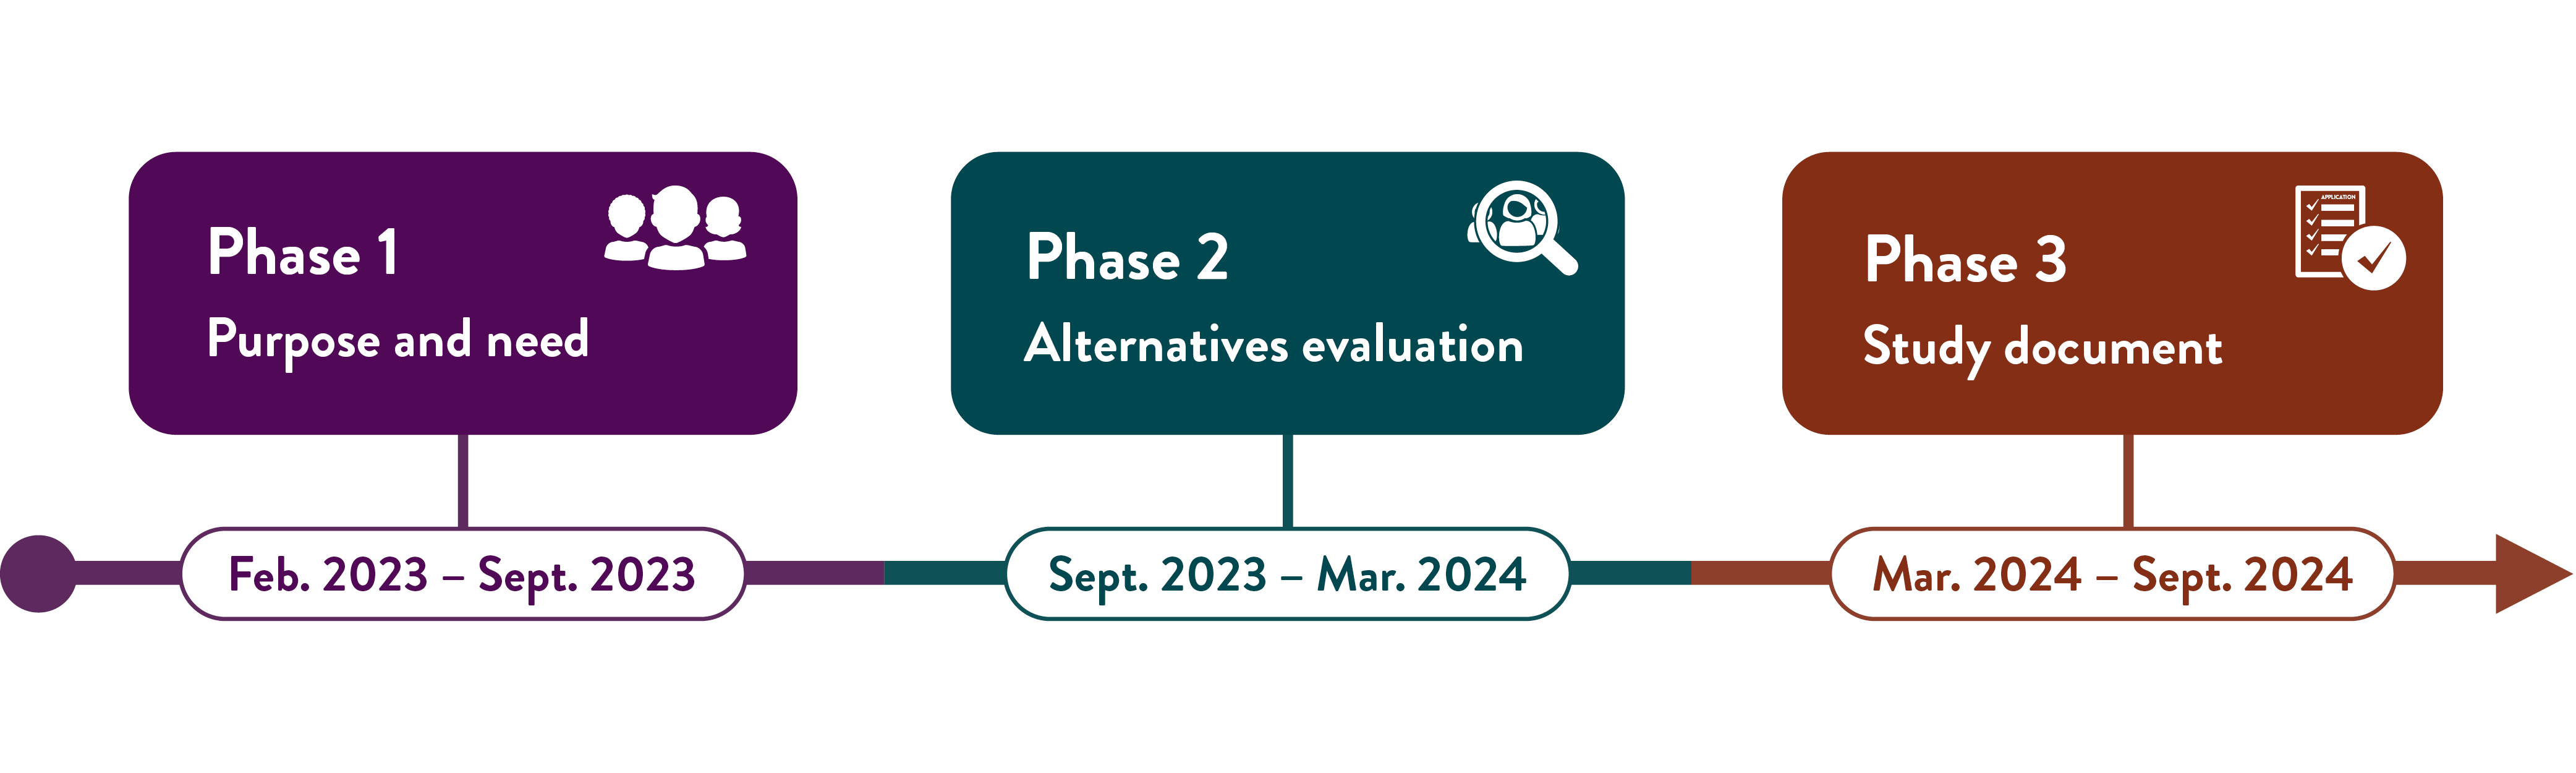 Timeline of the study phases showing Phase 1: Purpose and need (February 2023 through September 2023); Phase 2: Alternatives evaluation (September 2023 through March 2024); and Phase 3: Study document (March 2024 through September 2024).